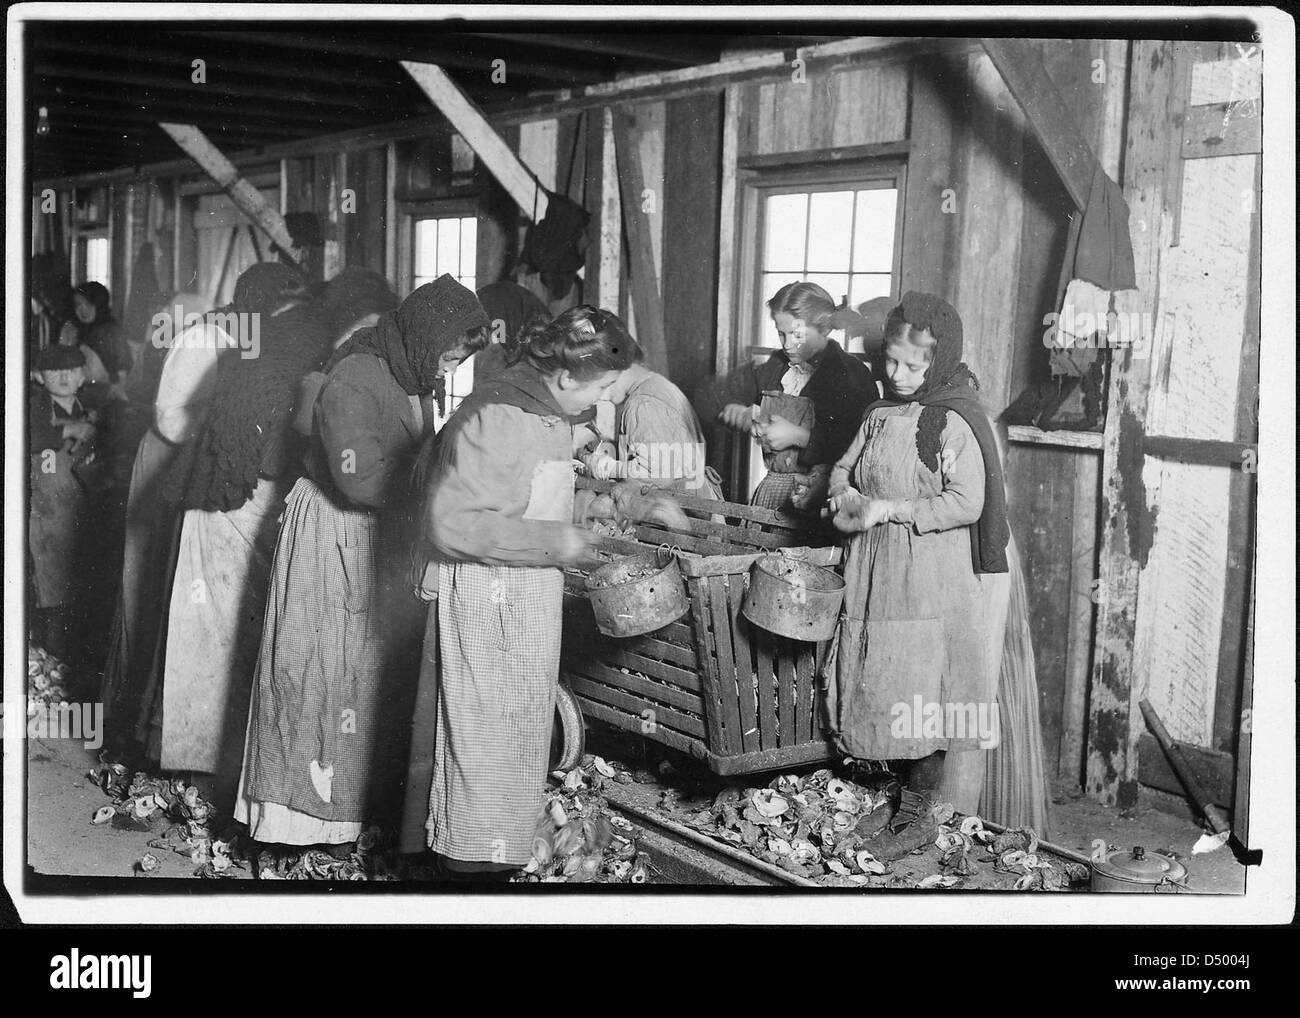 On right hand end is Marie Colbeck, 8 years old, who shucks 6 or 7 pots of oysters a day (30 or 35 cents) at Alabama Canning Factory, February 1911 Stock Photo